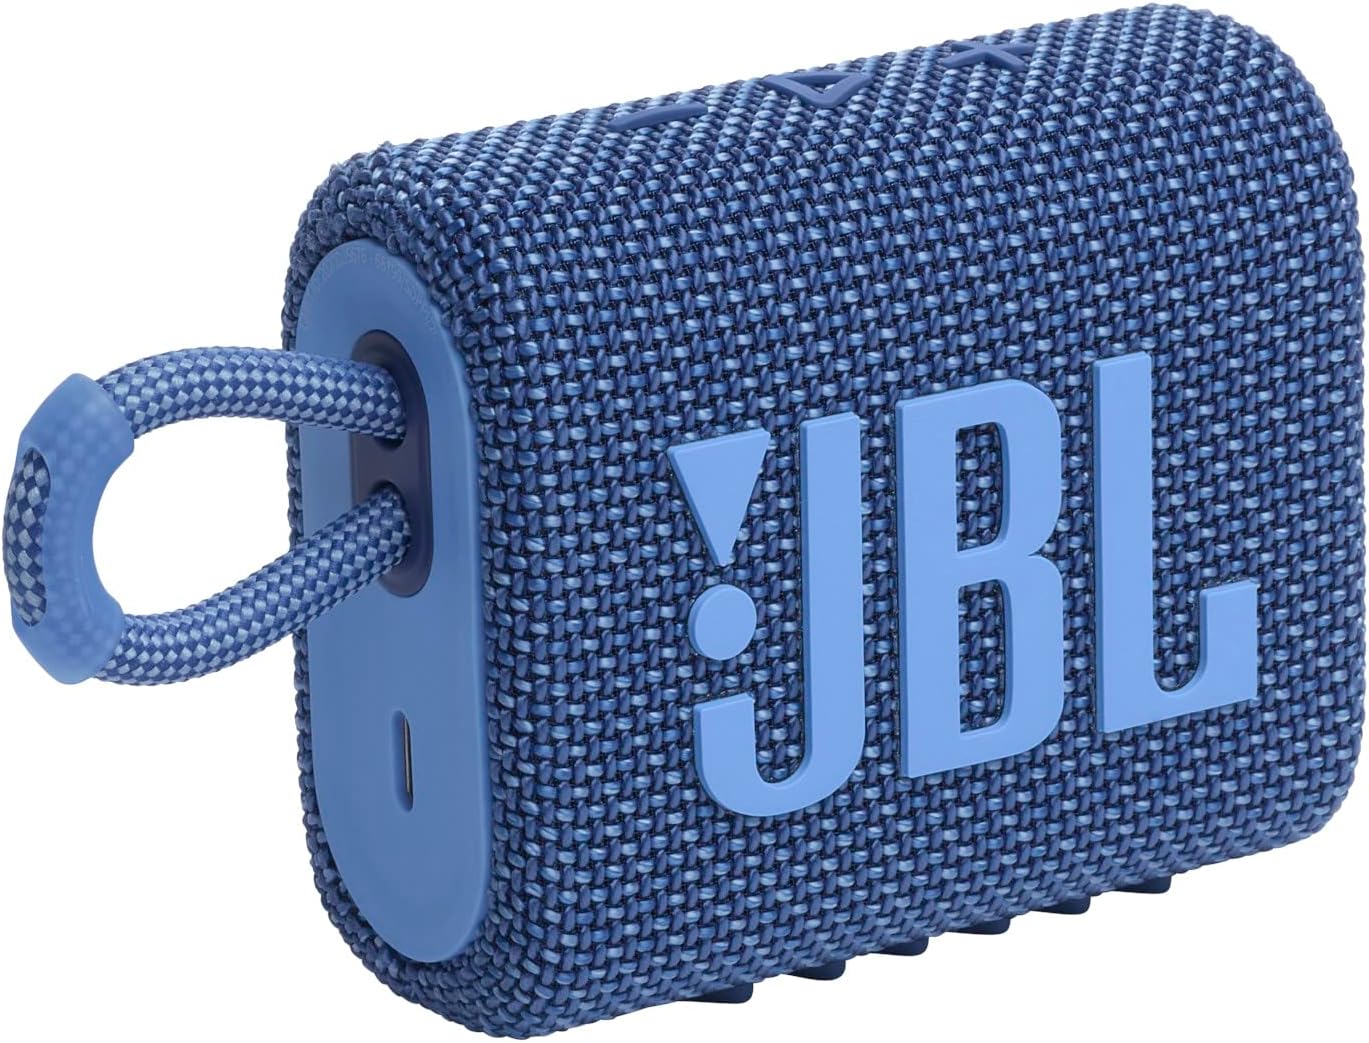 Jbl Go 3 Eco: Portable Speaker With Bluetooth, Built-In Battery, Waterproof And Dustproof Feature - Blue